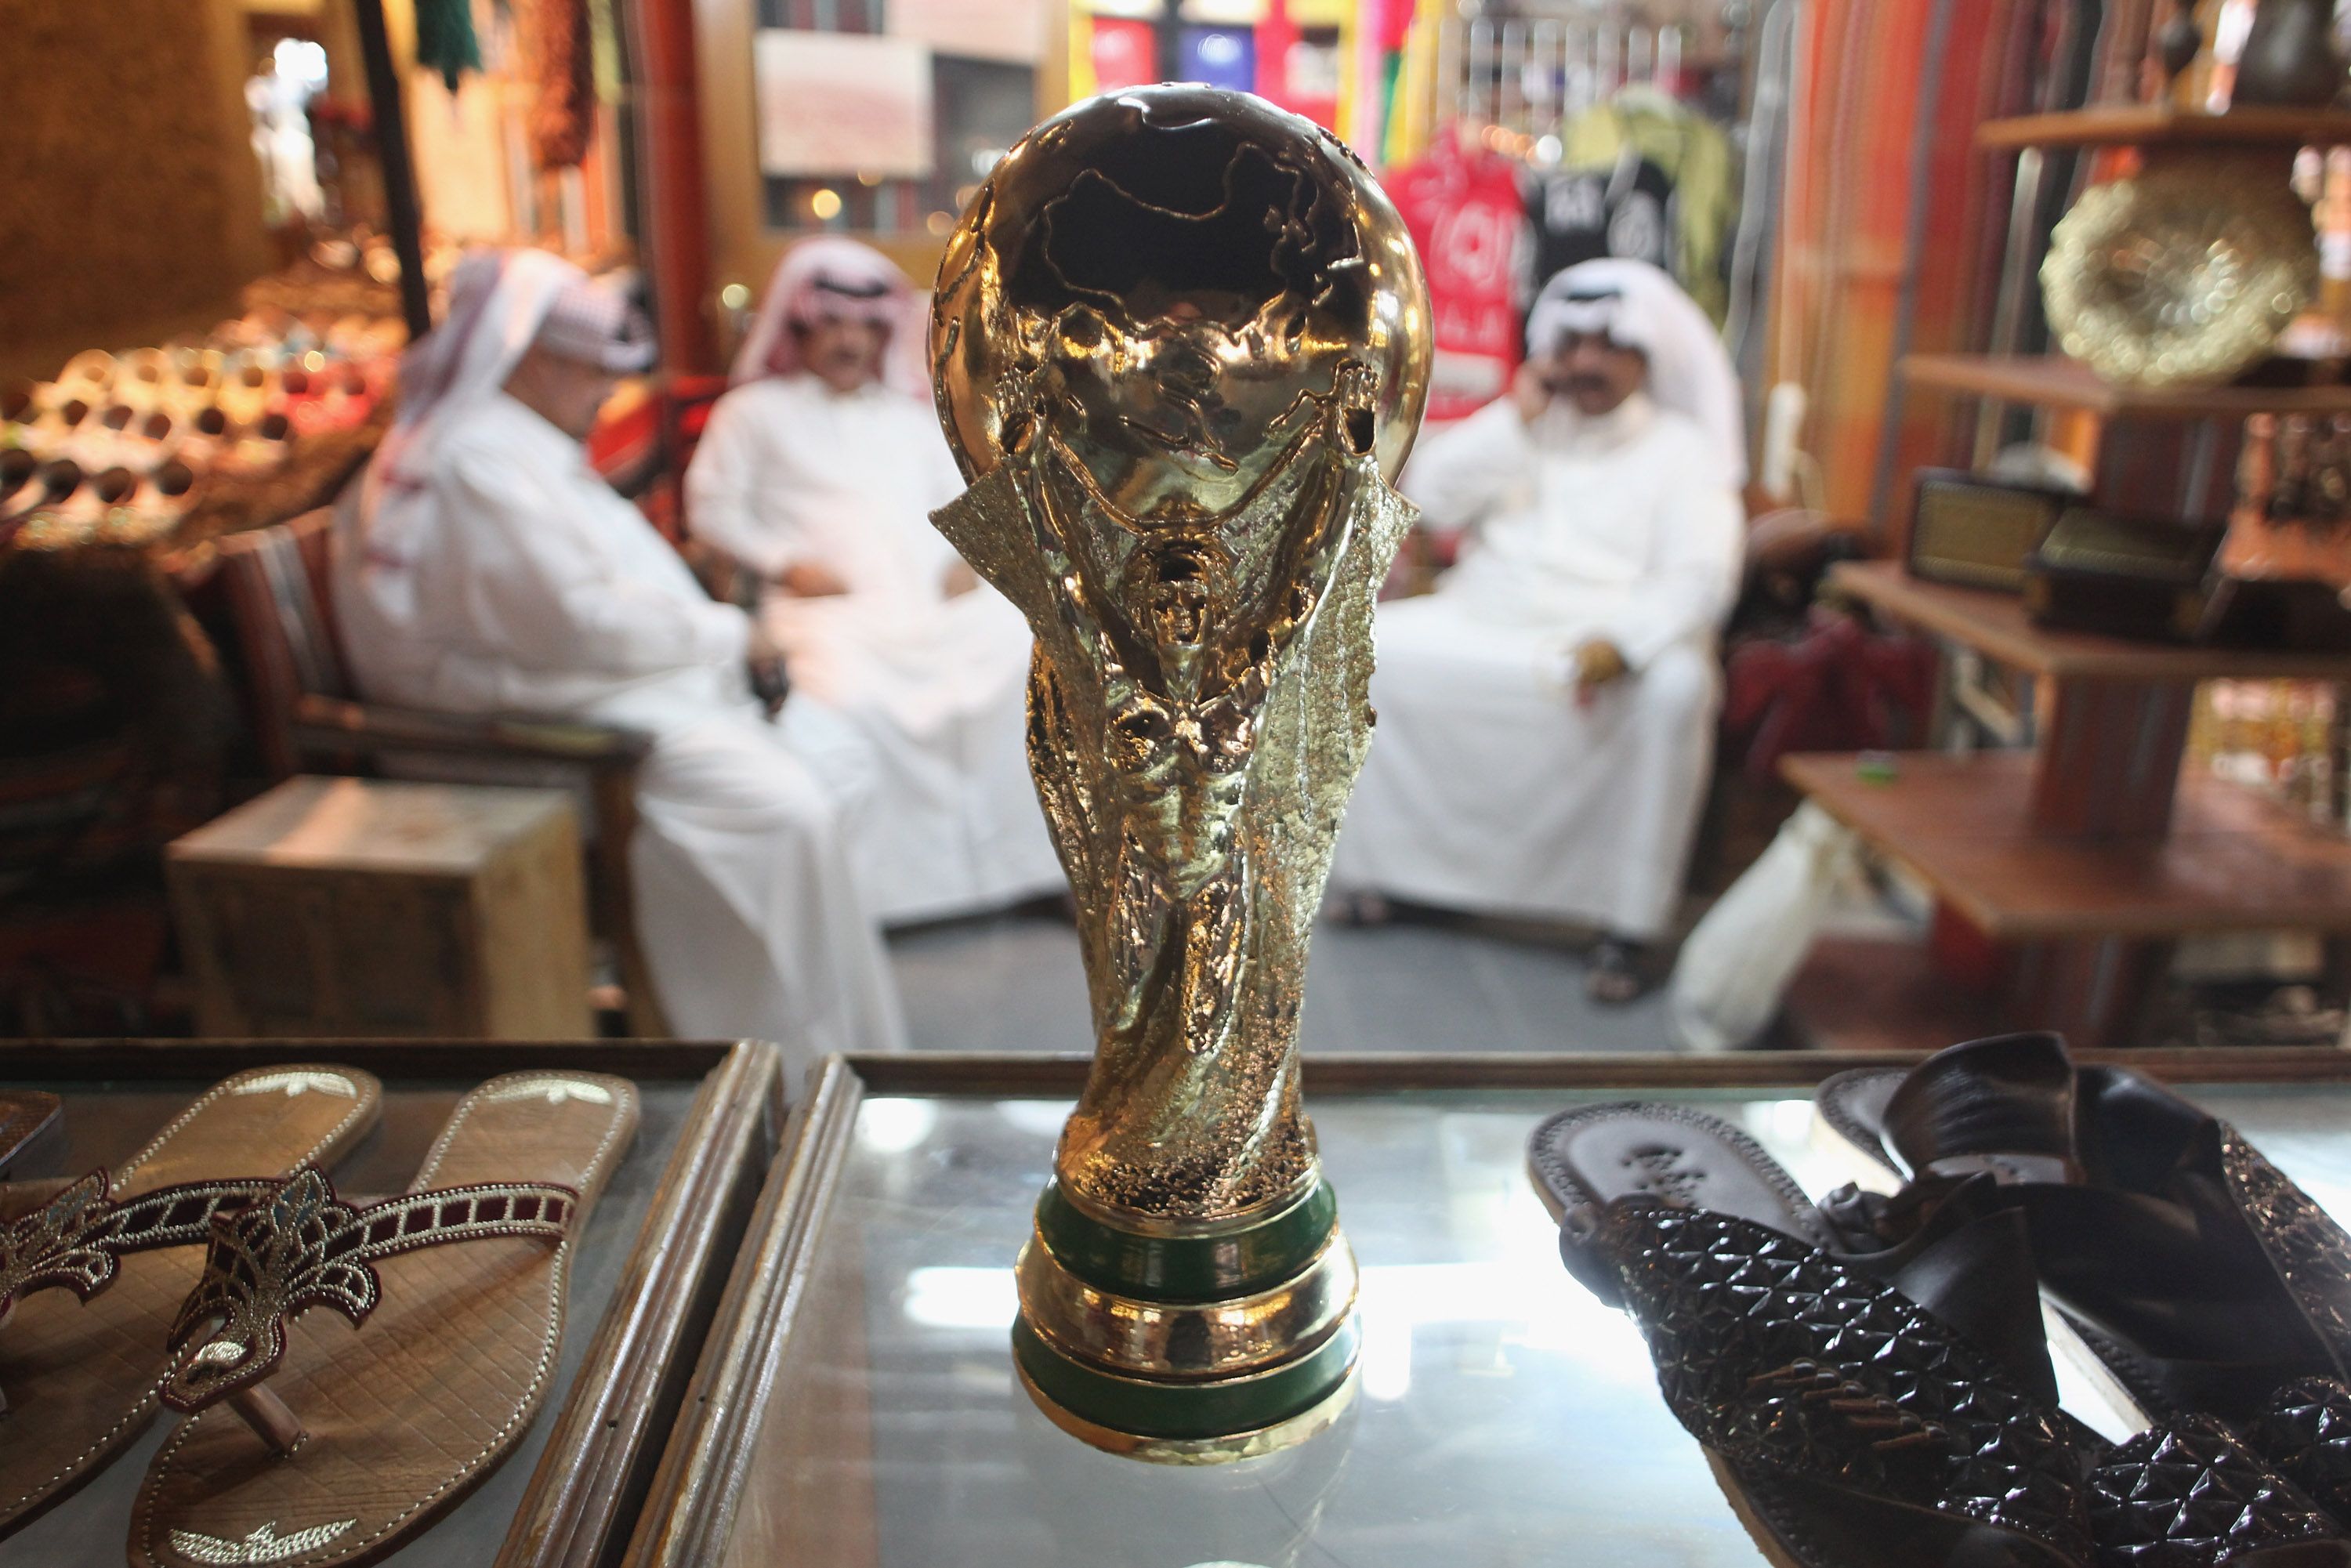 A replica of the famous World Cup trophy on show